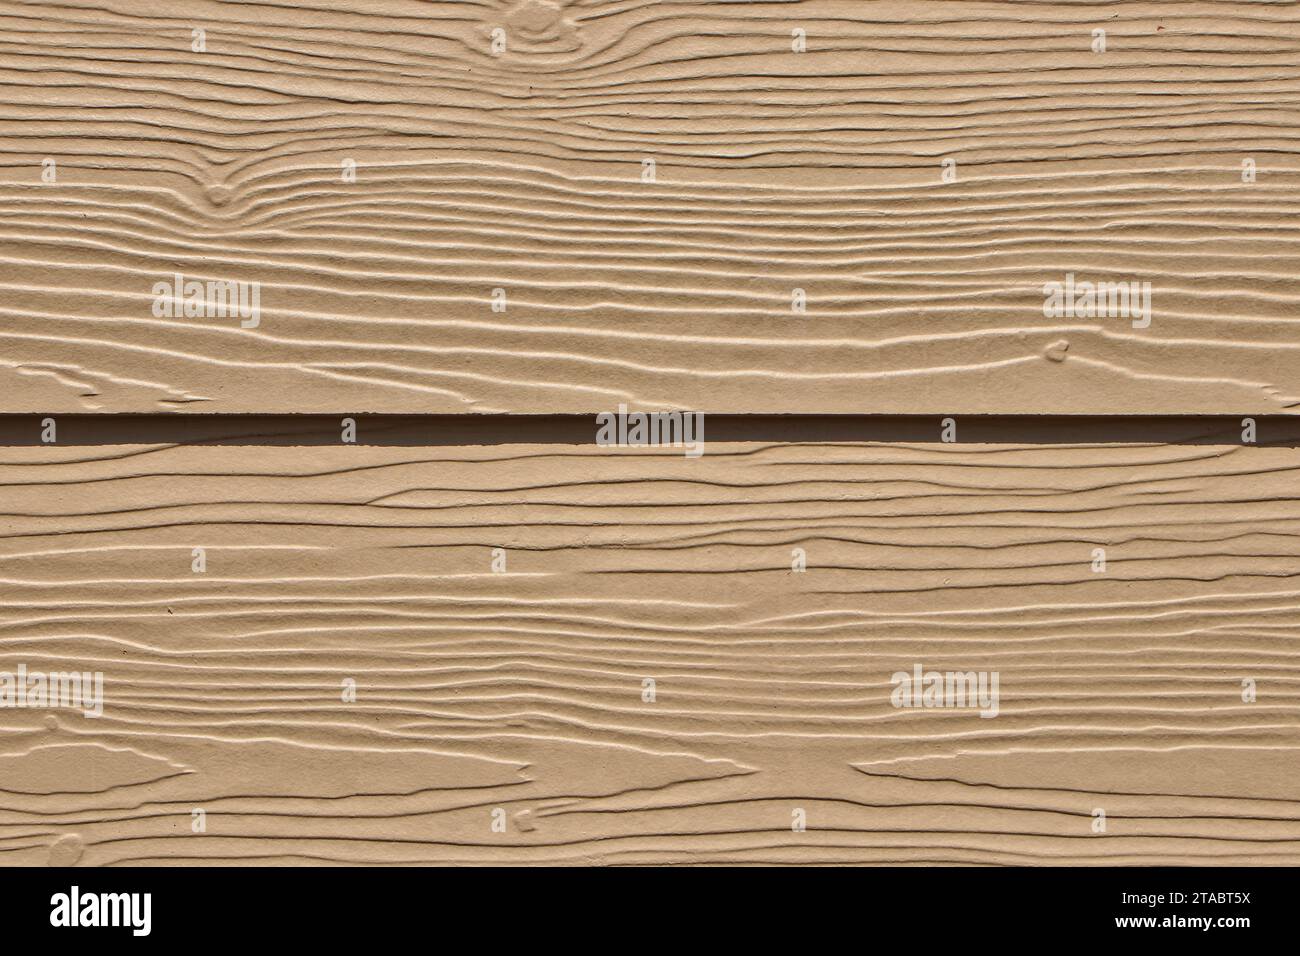 Artificial wood walls receive natural light during the day, showing texture details. Stock Photo